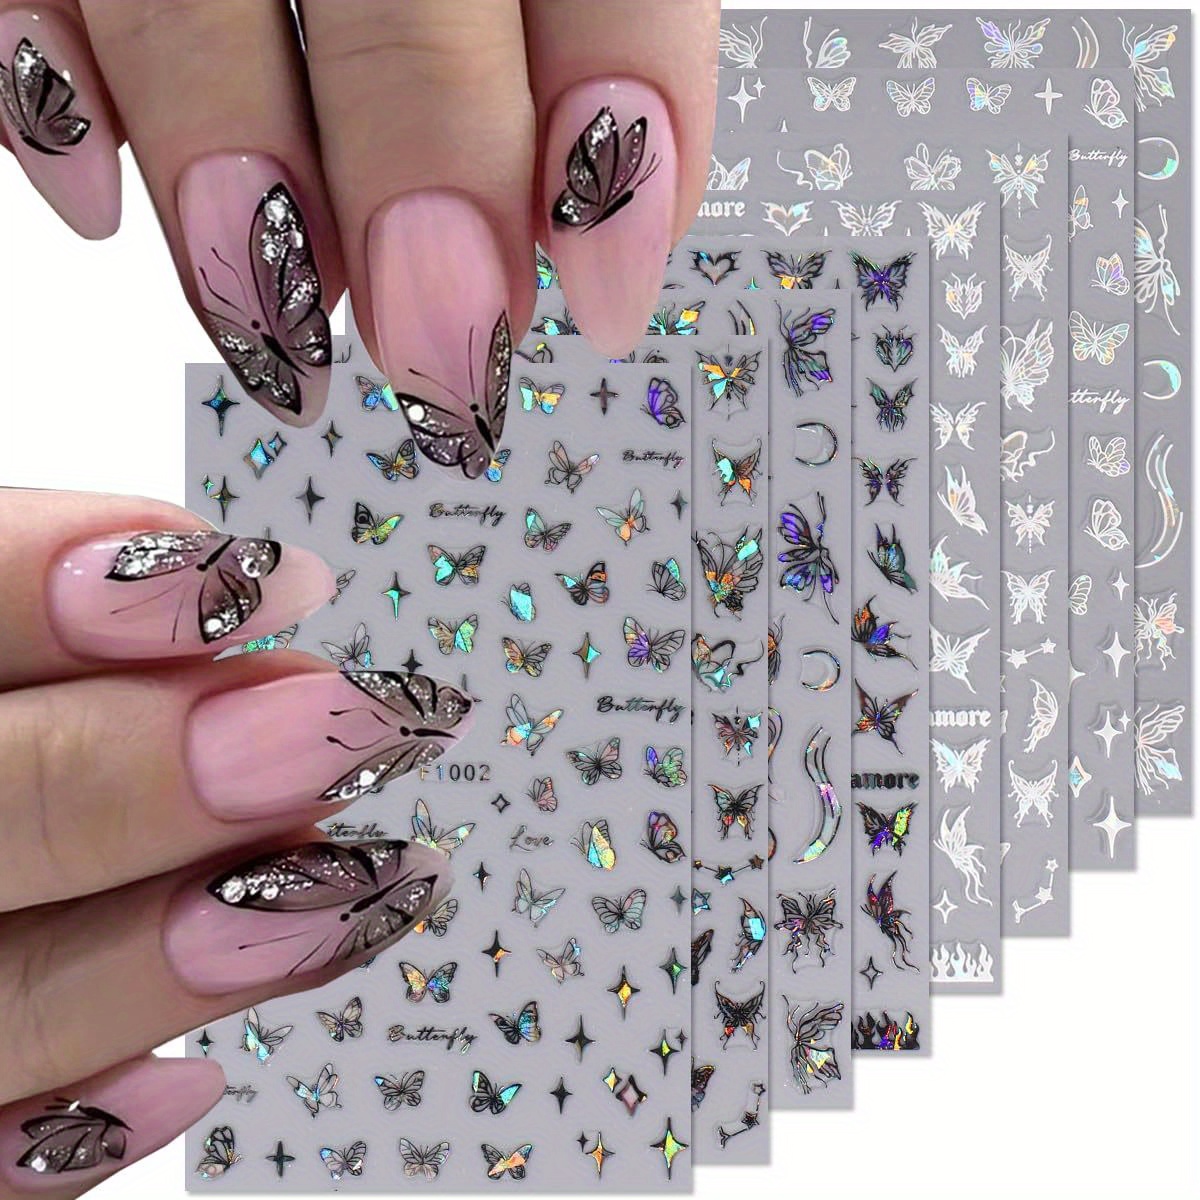 

8 Sheet Shiny Butterfly Nail Art Sticker 3d Self-adhesive Nail Art Supplies Holographic Laser Glitter Butterfly Nail Design Nail Stickers For Nail Art Foil Butterfly Charm Diy Manicure Decor